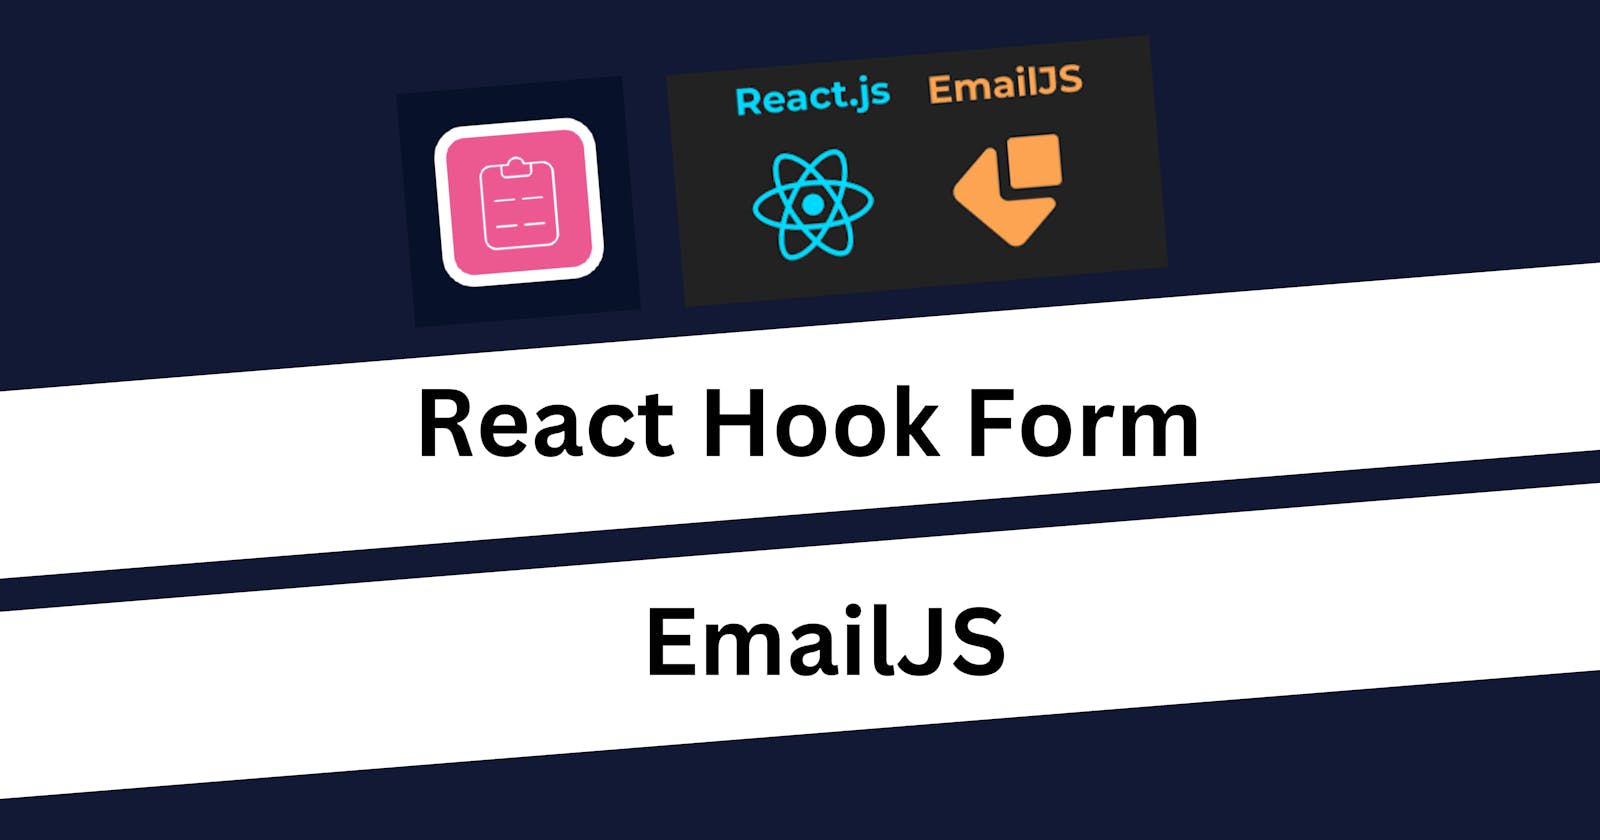 Streamline Form Validation with React Hook Form and implement Email Service using EmailJS